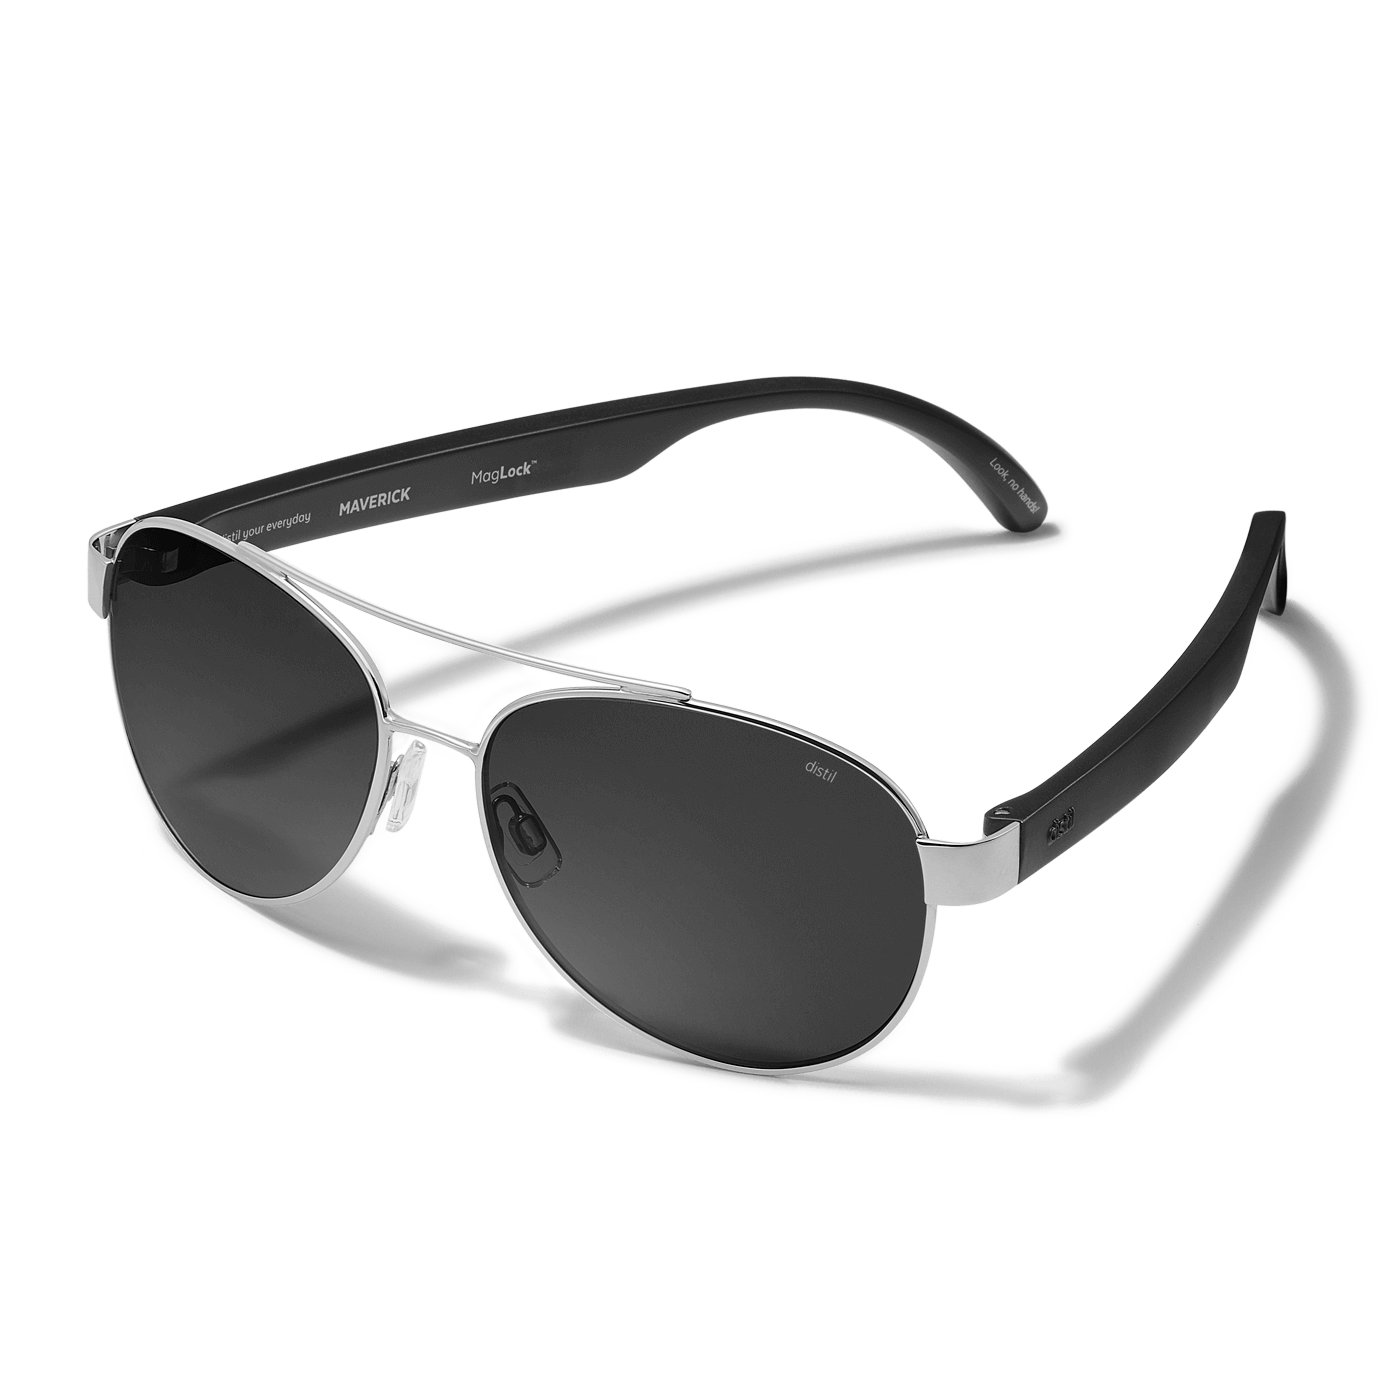 Distil Union Titanium Maverick MagLock Sunglasses in silver with black flex-to-fit arms and gray polarized lenses